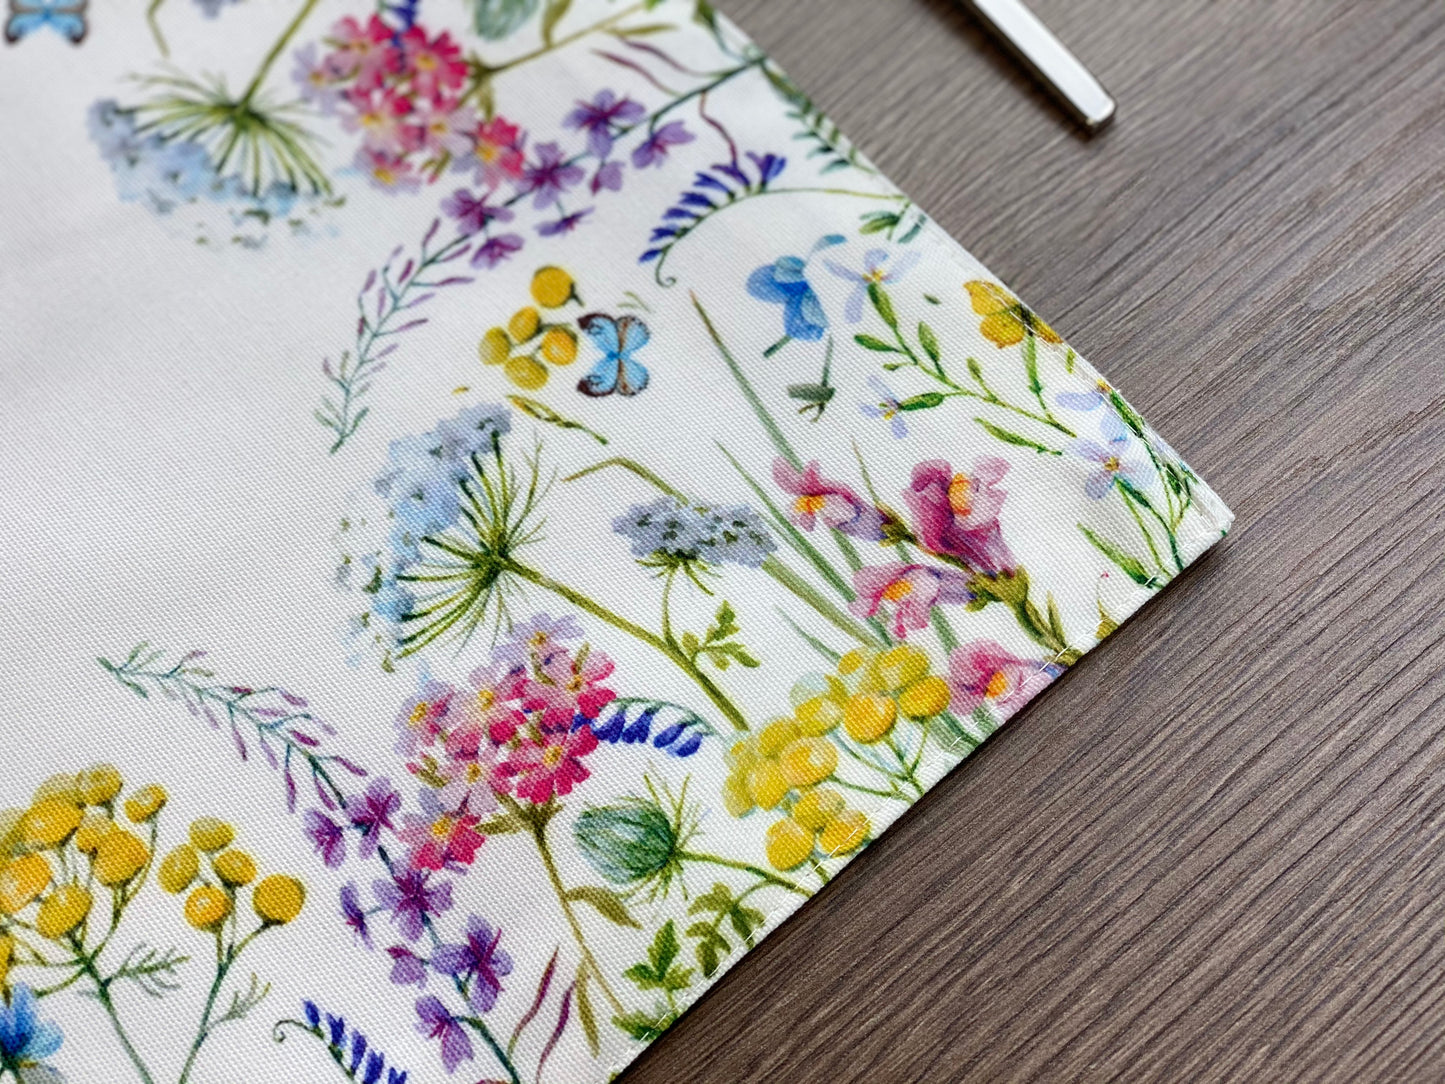 Set of 4 Wildflower and butterfly placemat, Field plants and floral botanical pattern, Washable Cotton Placemat for fall dining table